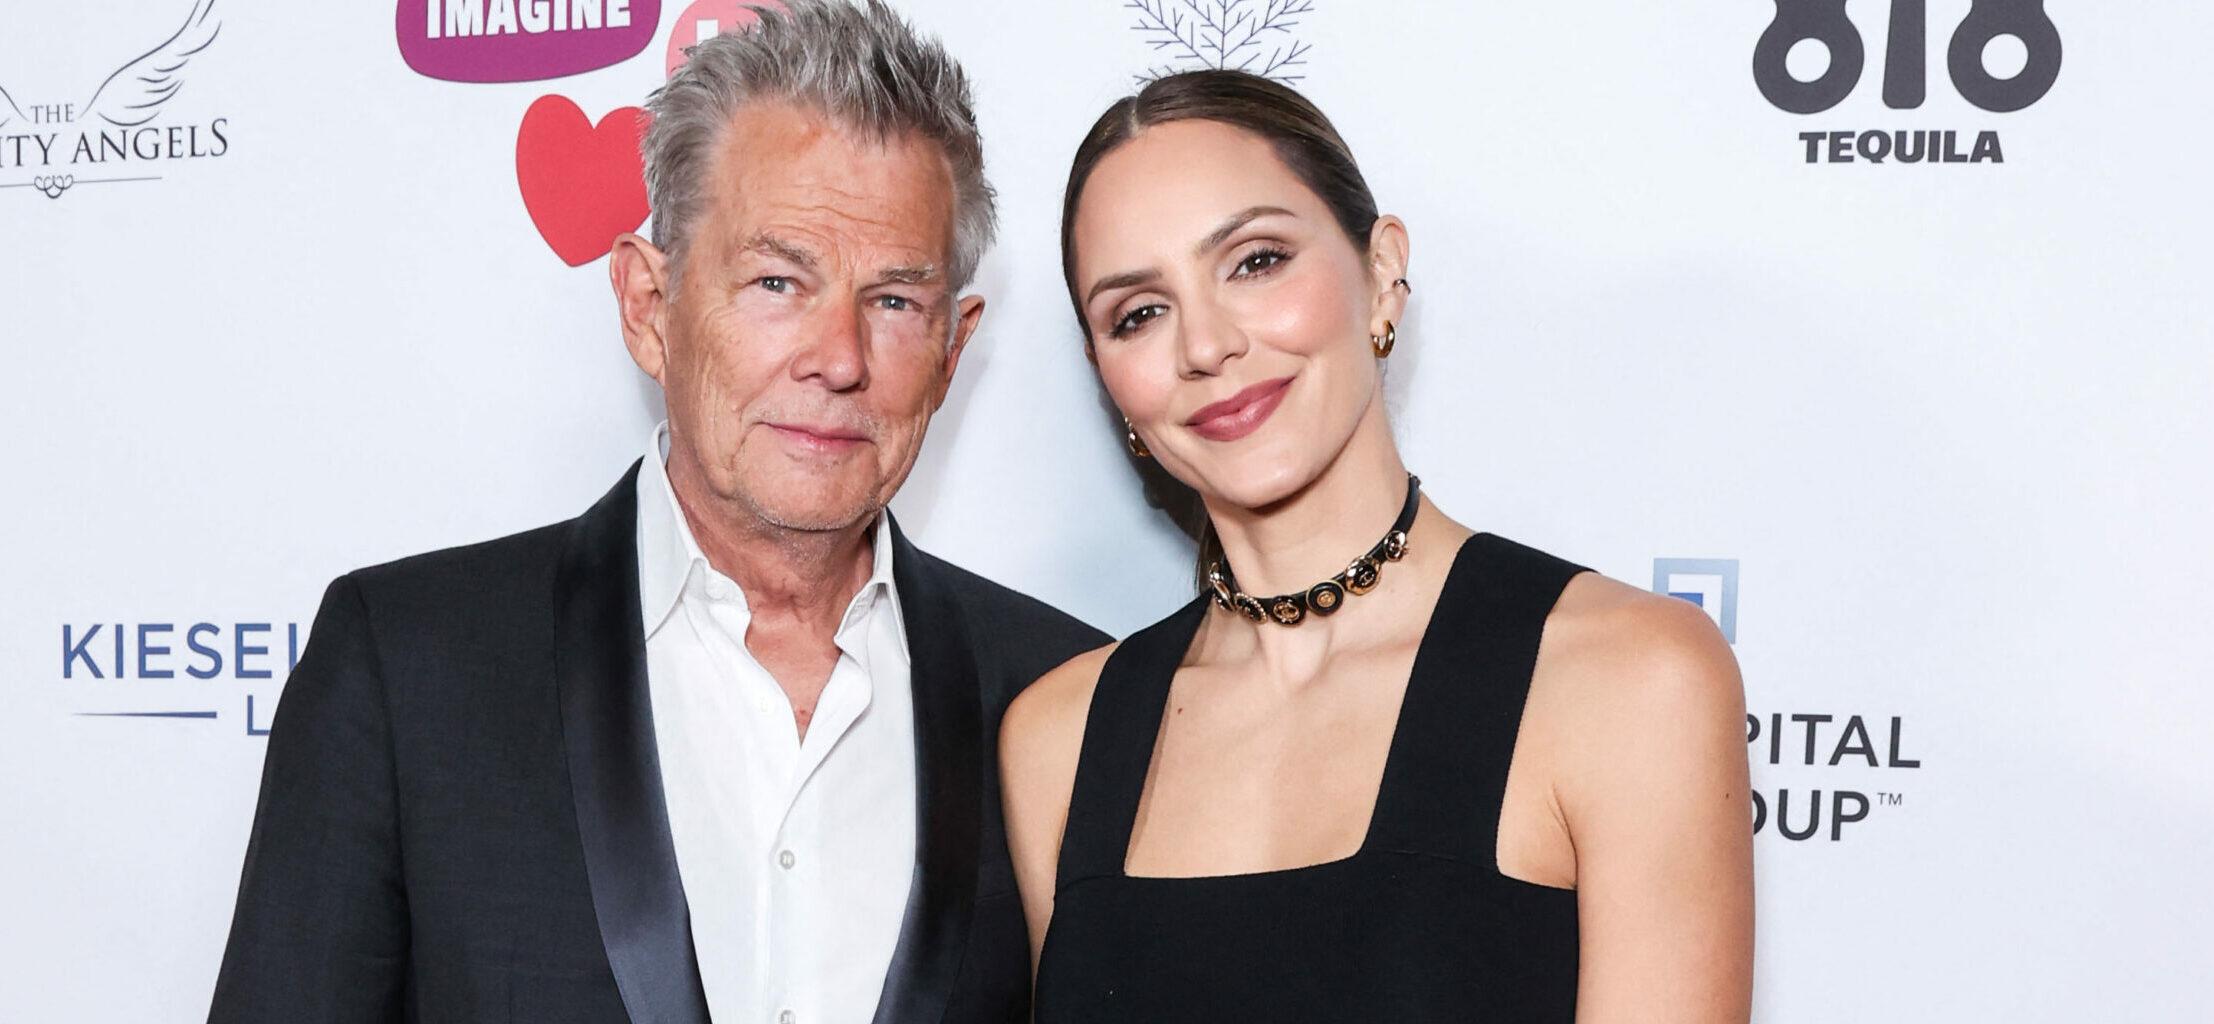 David Foster and Katharine McPhee at the 7th Annual Imagine Ball